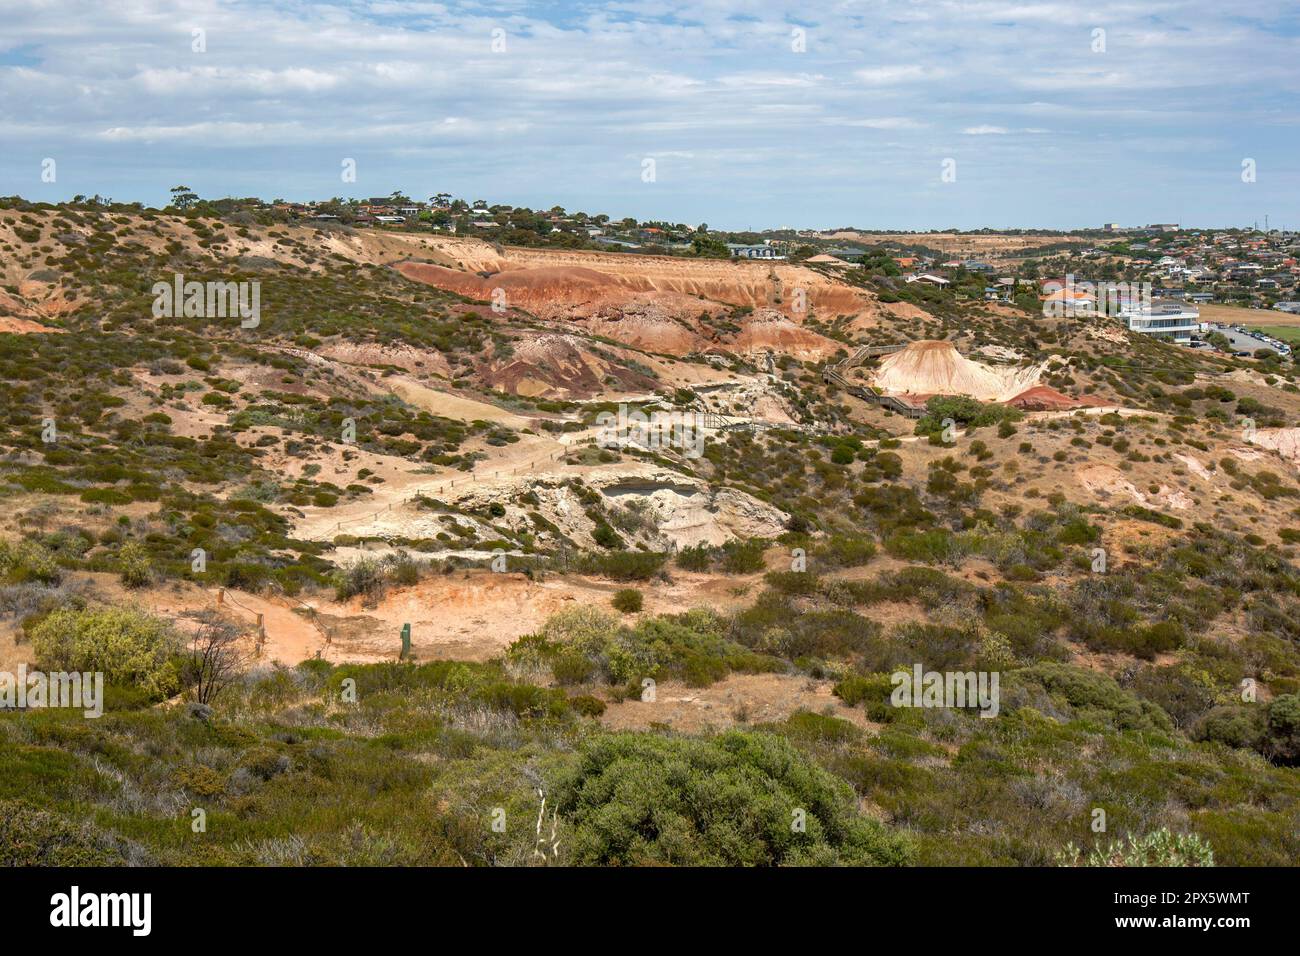 A view within the Hallett Cove Conservation Park in Adelaide in South Australia looking towards the famous Sugarloaf and the Amphitheatre. Stock Photo